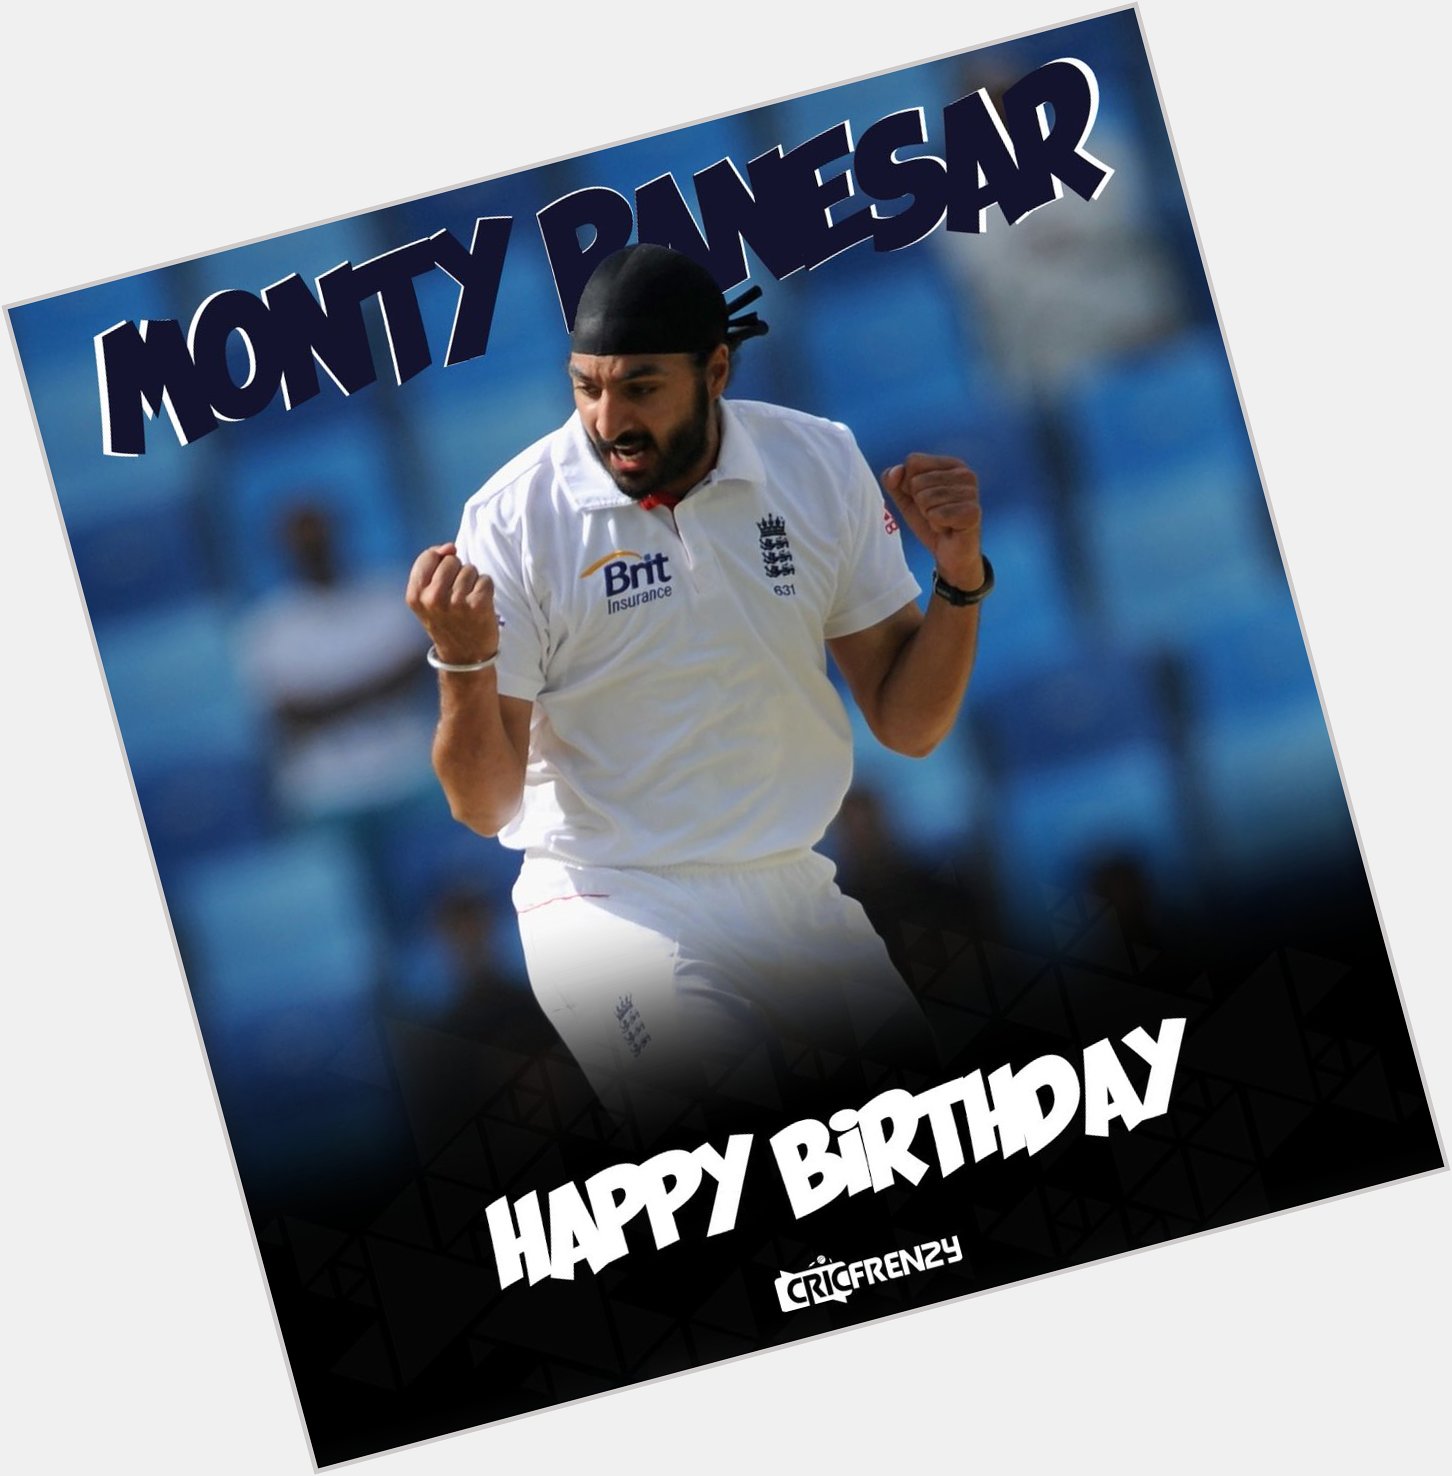 Two time Ashes winner 2009, 2010 11
Happy birthday Monty Panesar    